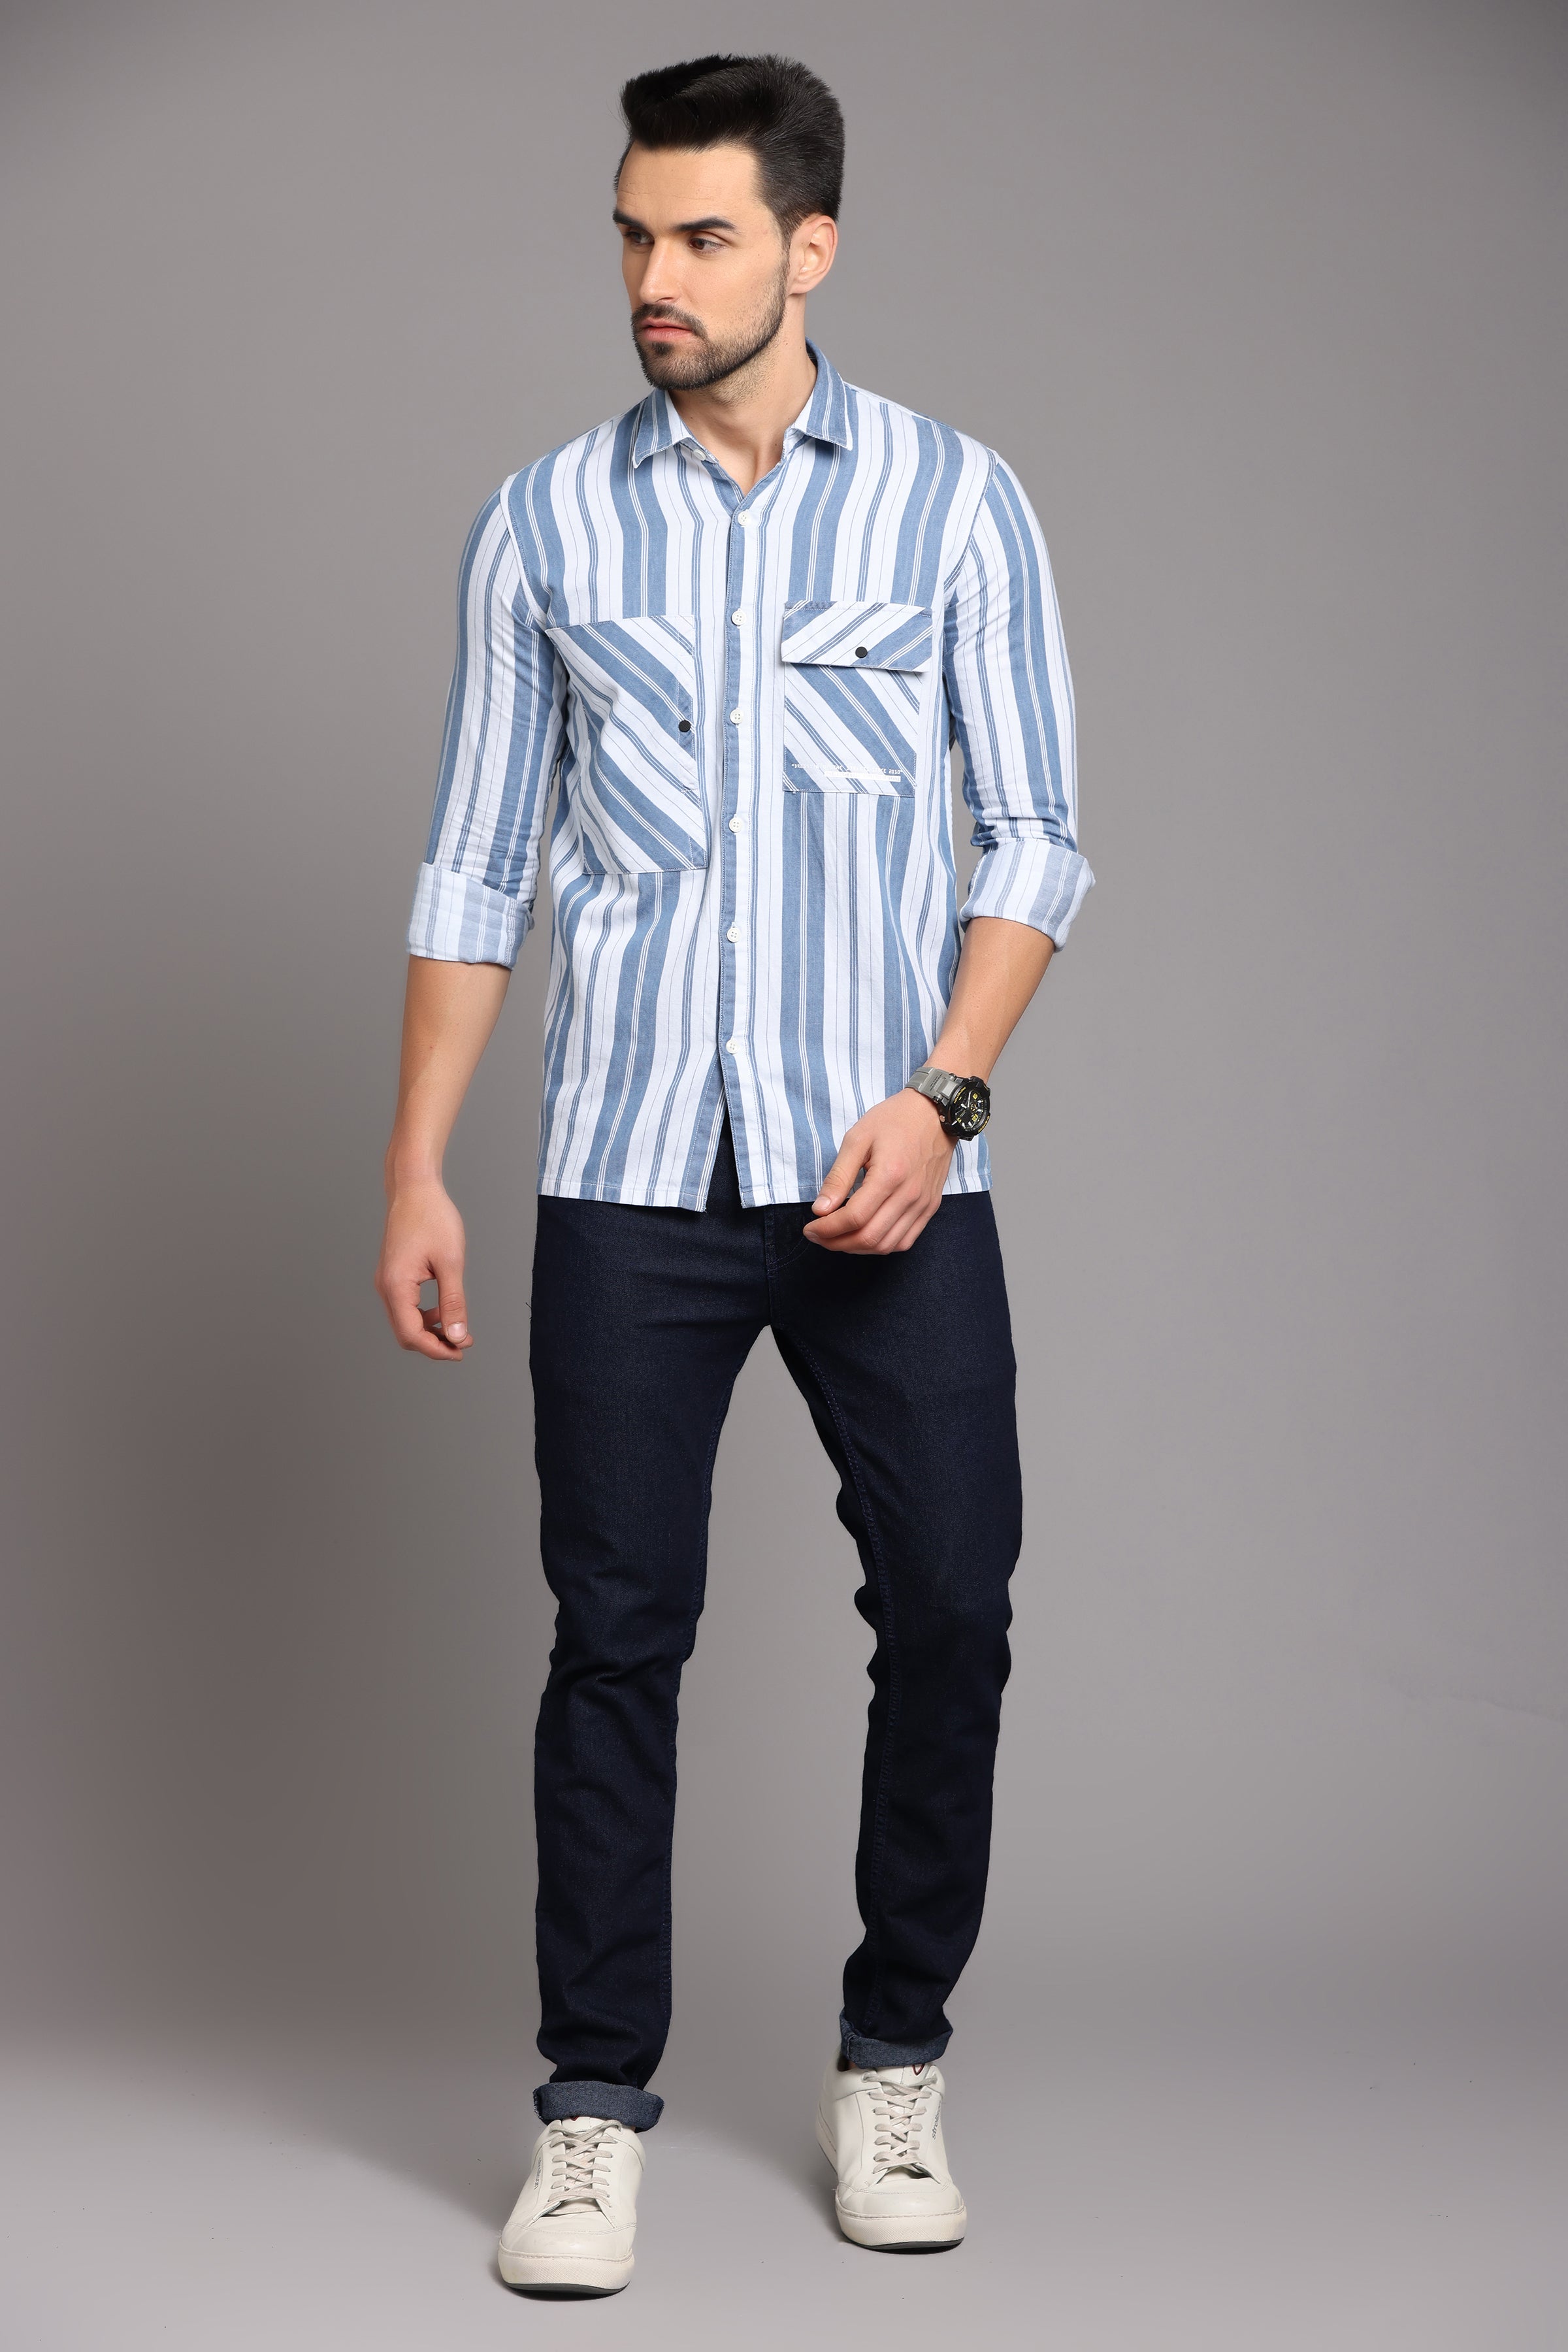 Blue and White Striped Full Sleeve Shirt Shirts Project 30 